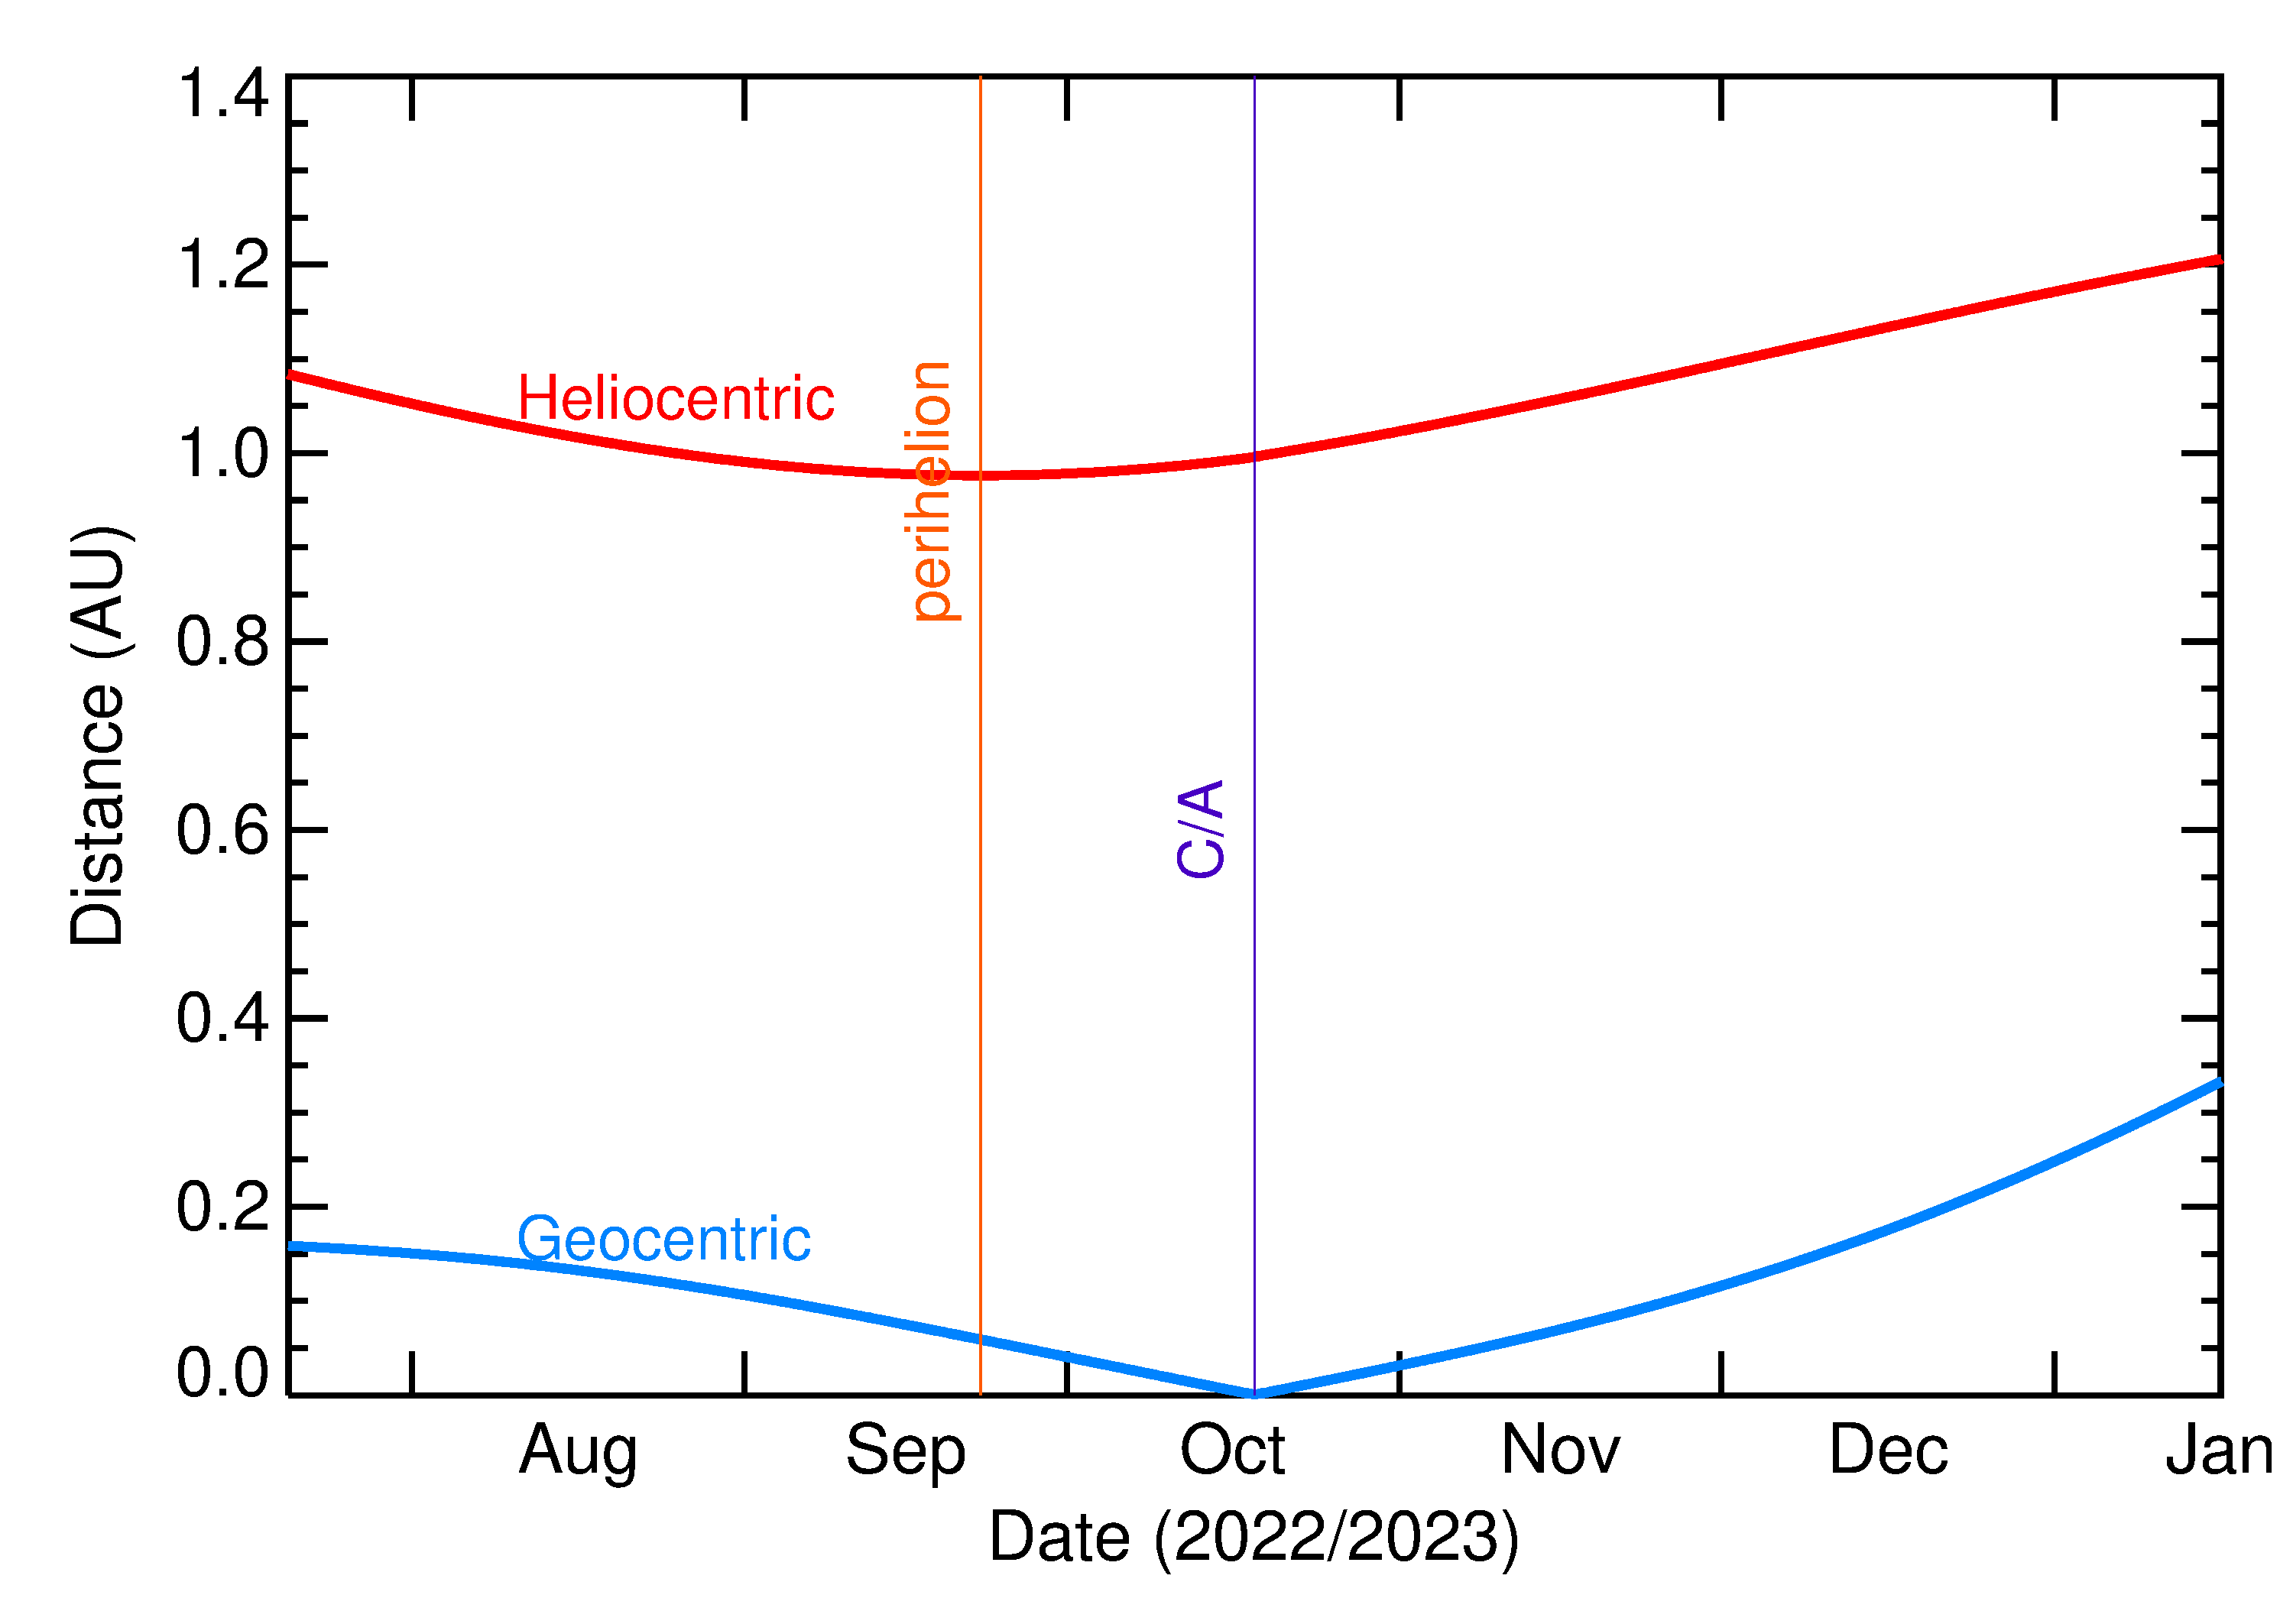 Heliocentric and Geocentric Distances of 2022 UA5 in the months around closest approach